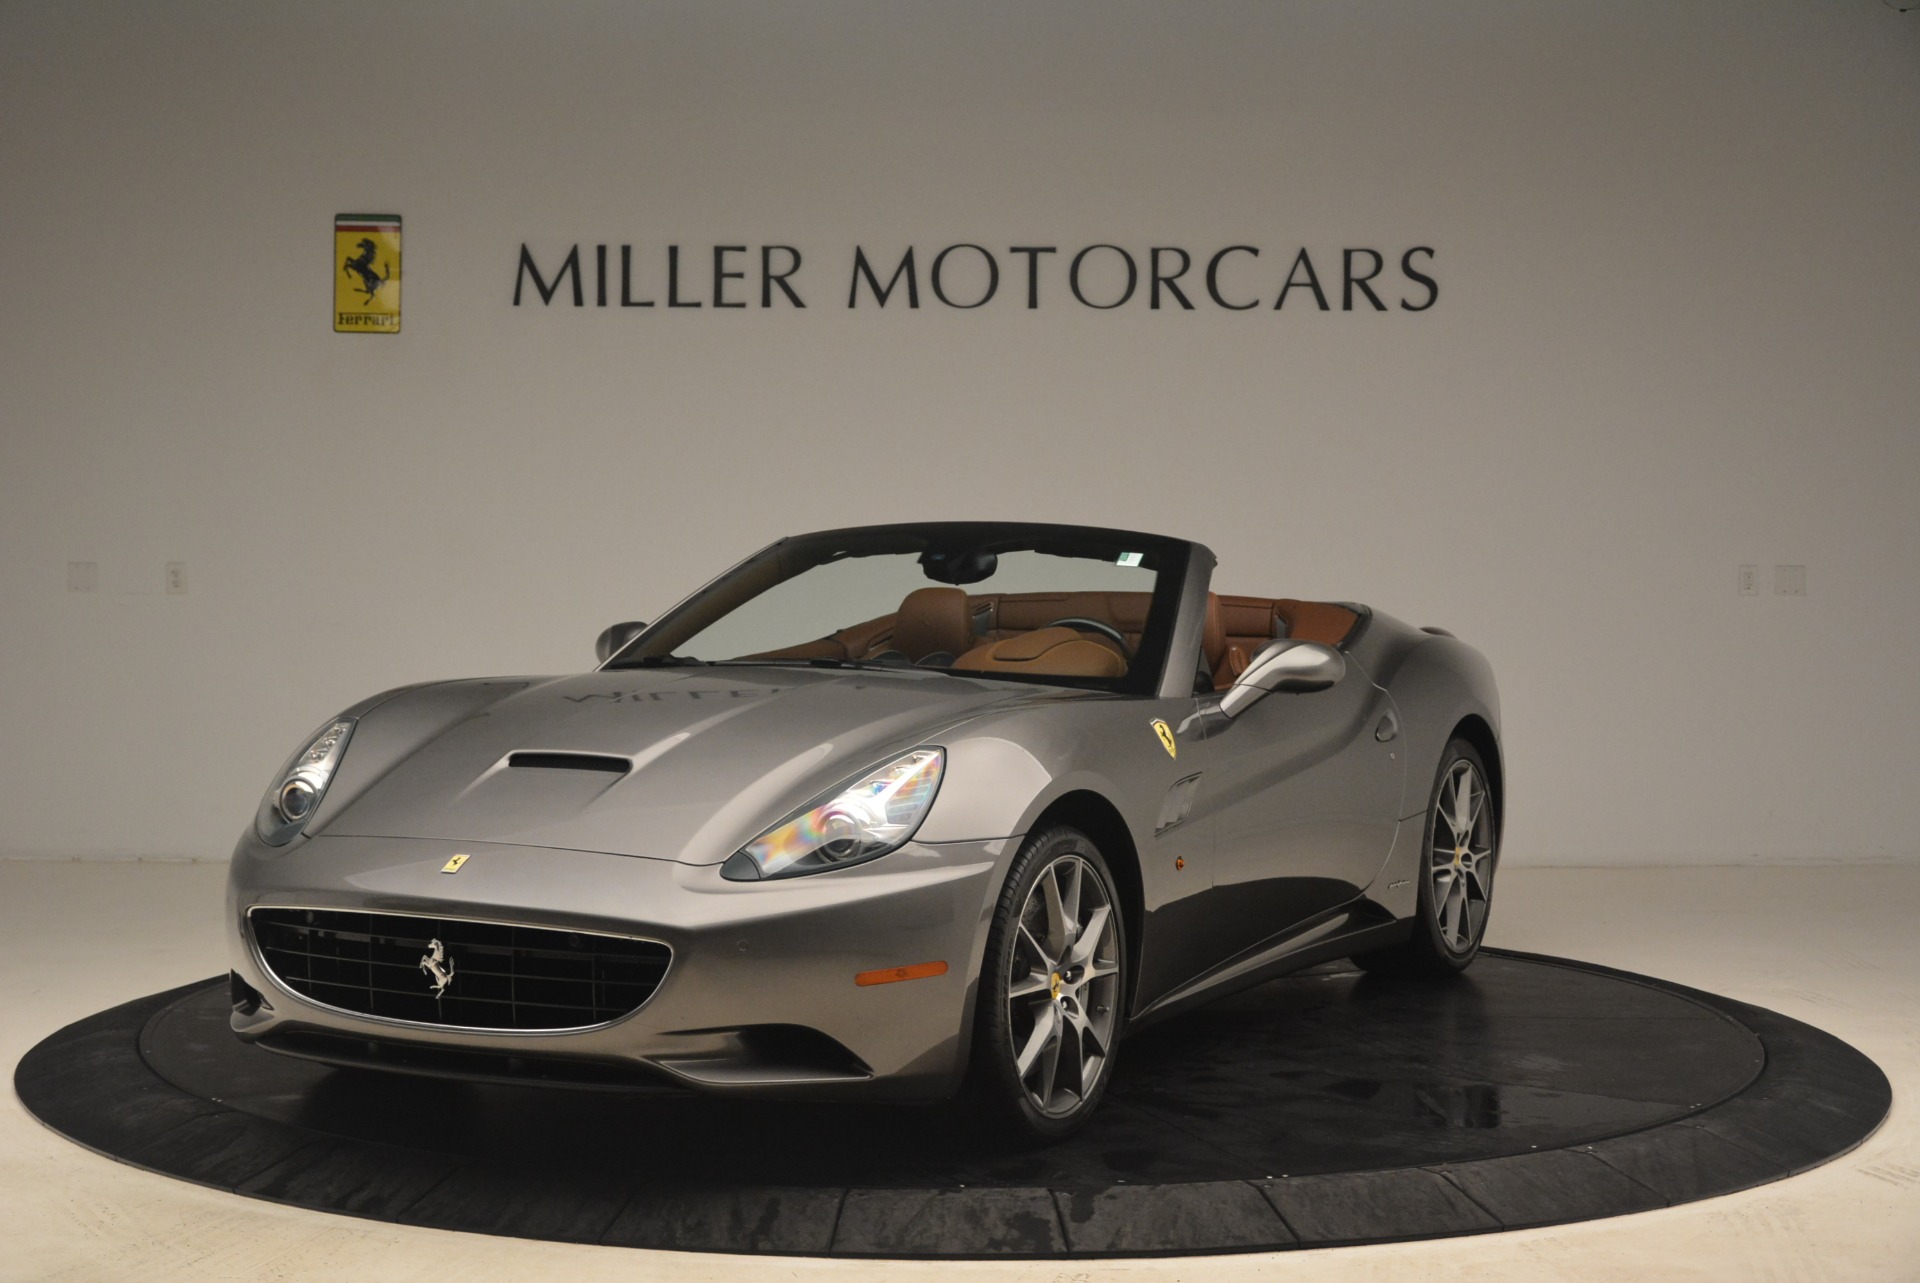 Used 2012 Ferrari California for sale Sold at Rolls-Royce Motor Cars Greenwich in Greenwich CT 06830 1